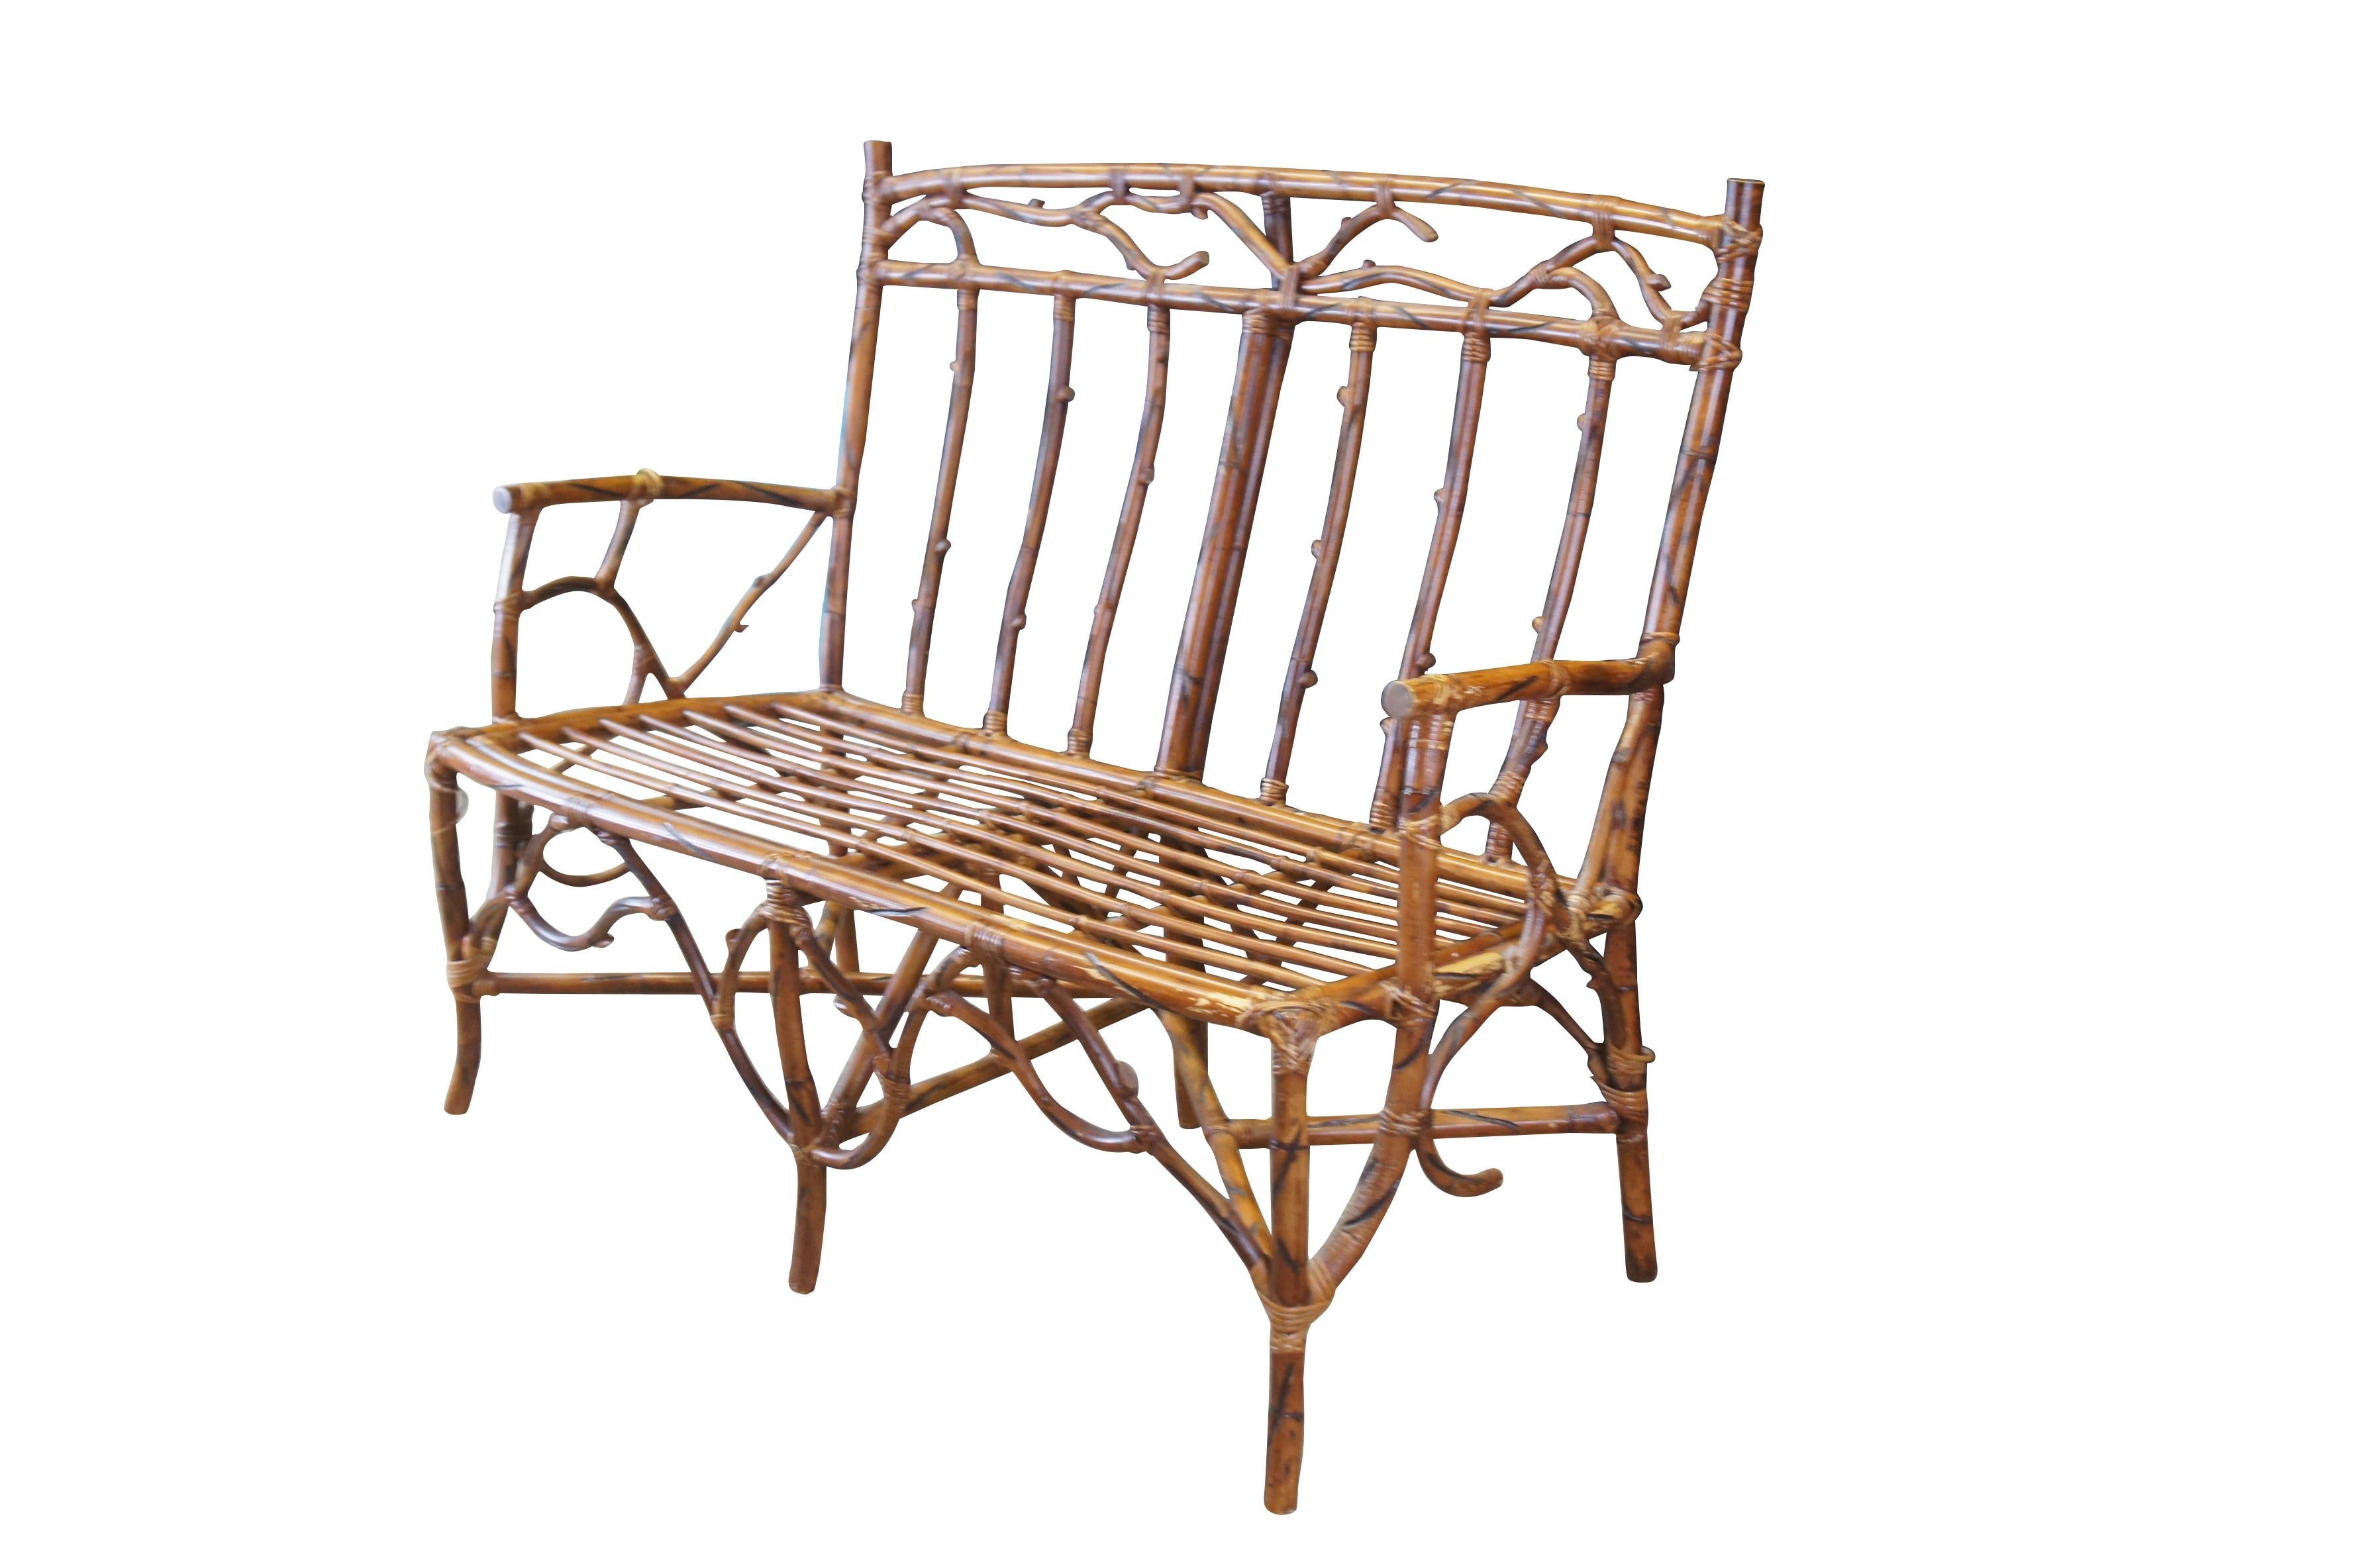 Vintage rustic log cabin / farmhouse / adirondak / tree branch style bench or settee.  Made of bamboo and rattan featuring bentwood style and slatted back.

Dimensions:
40